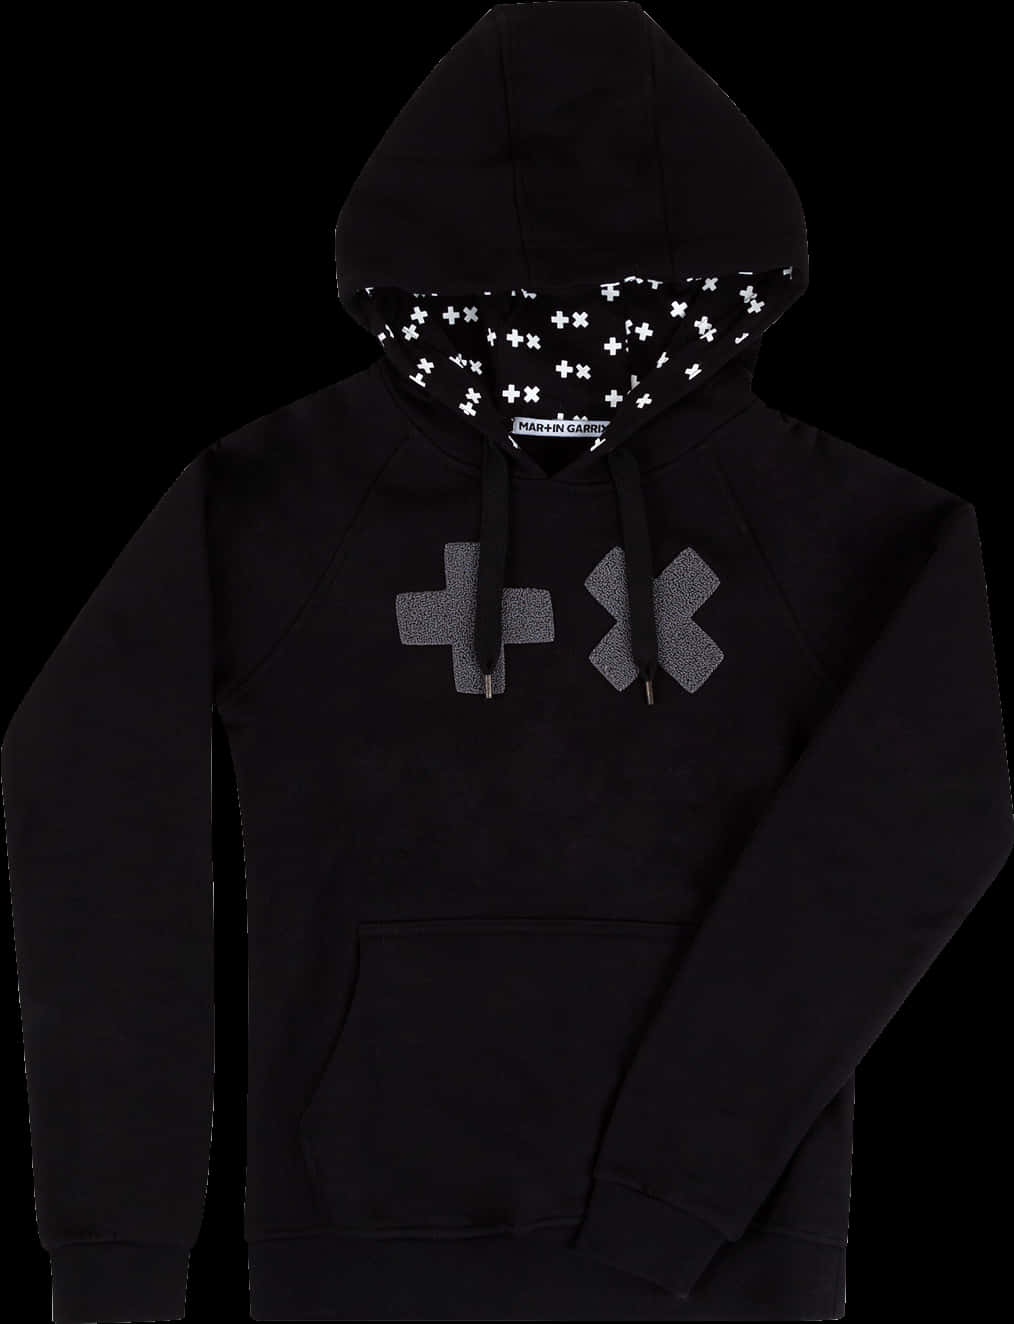 A Black Hoodie With A White Cross On It